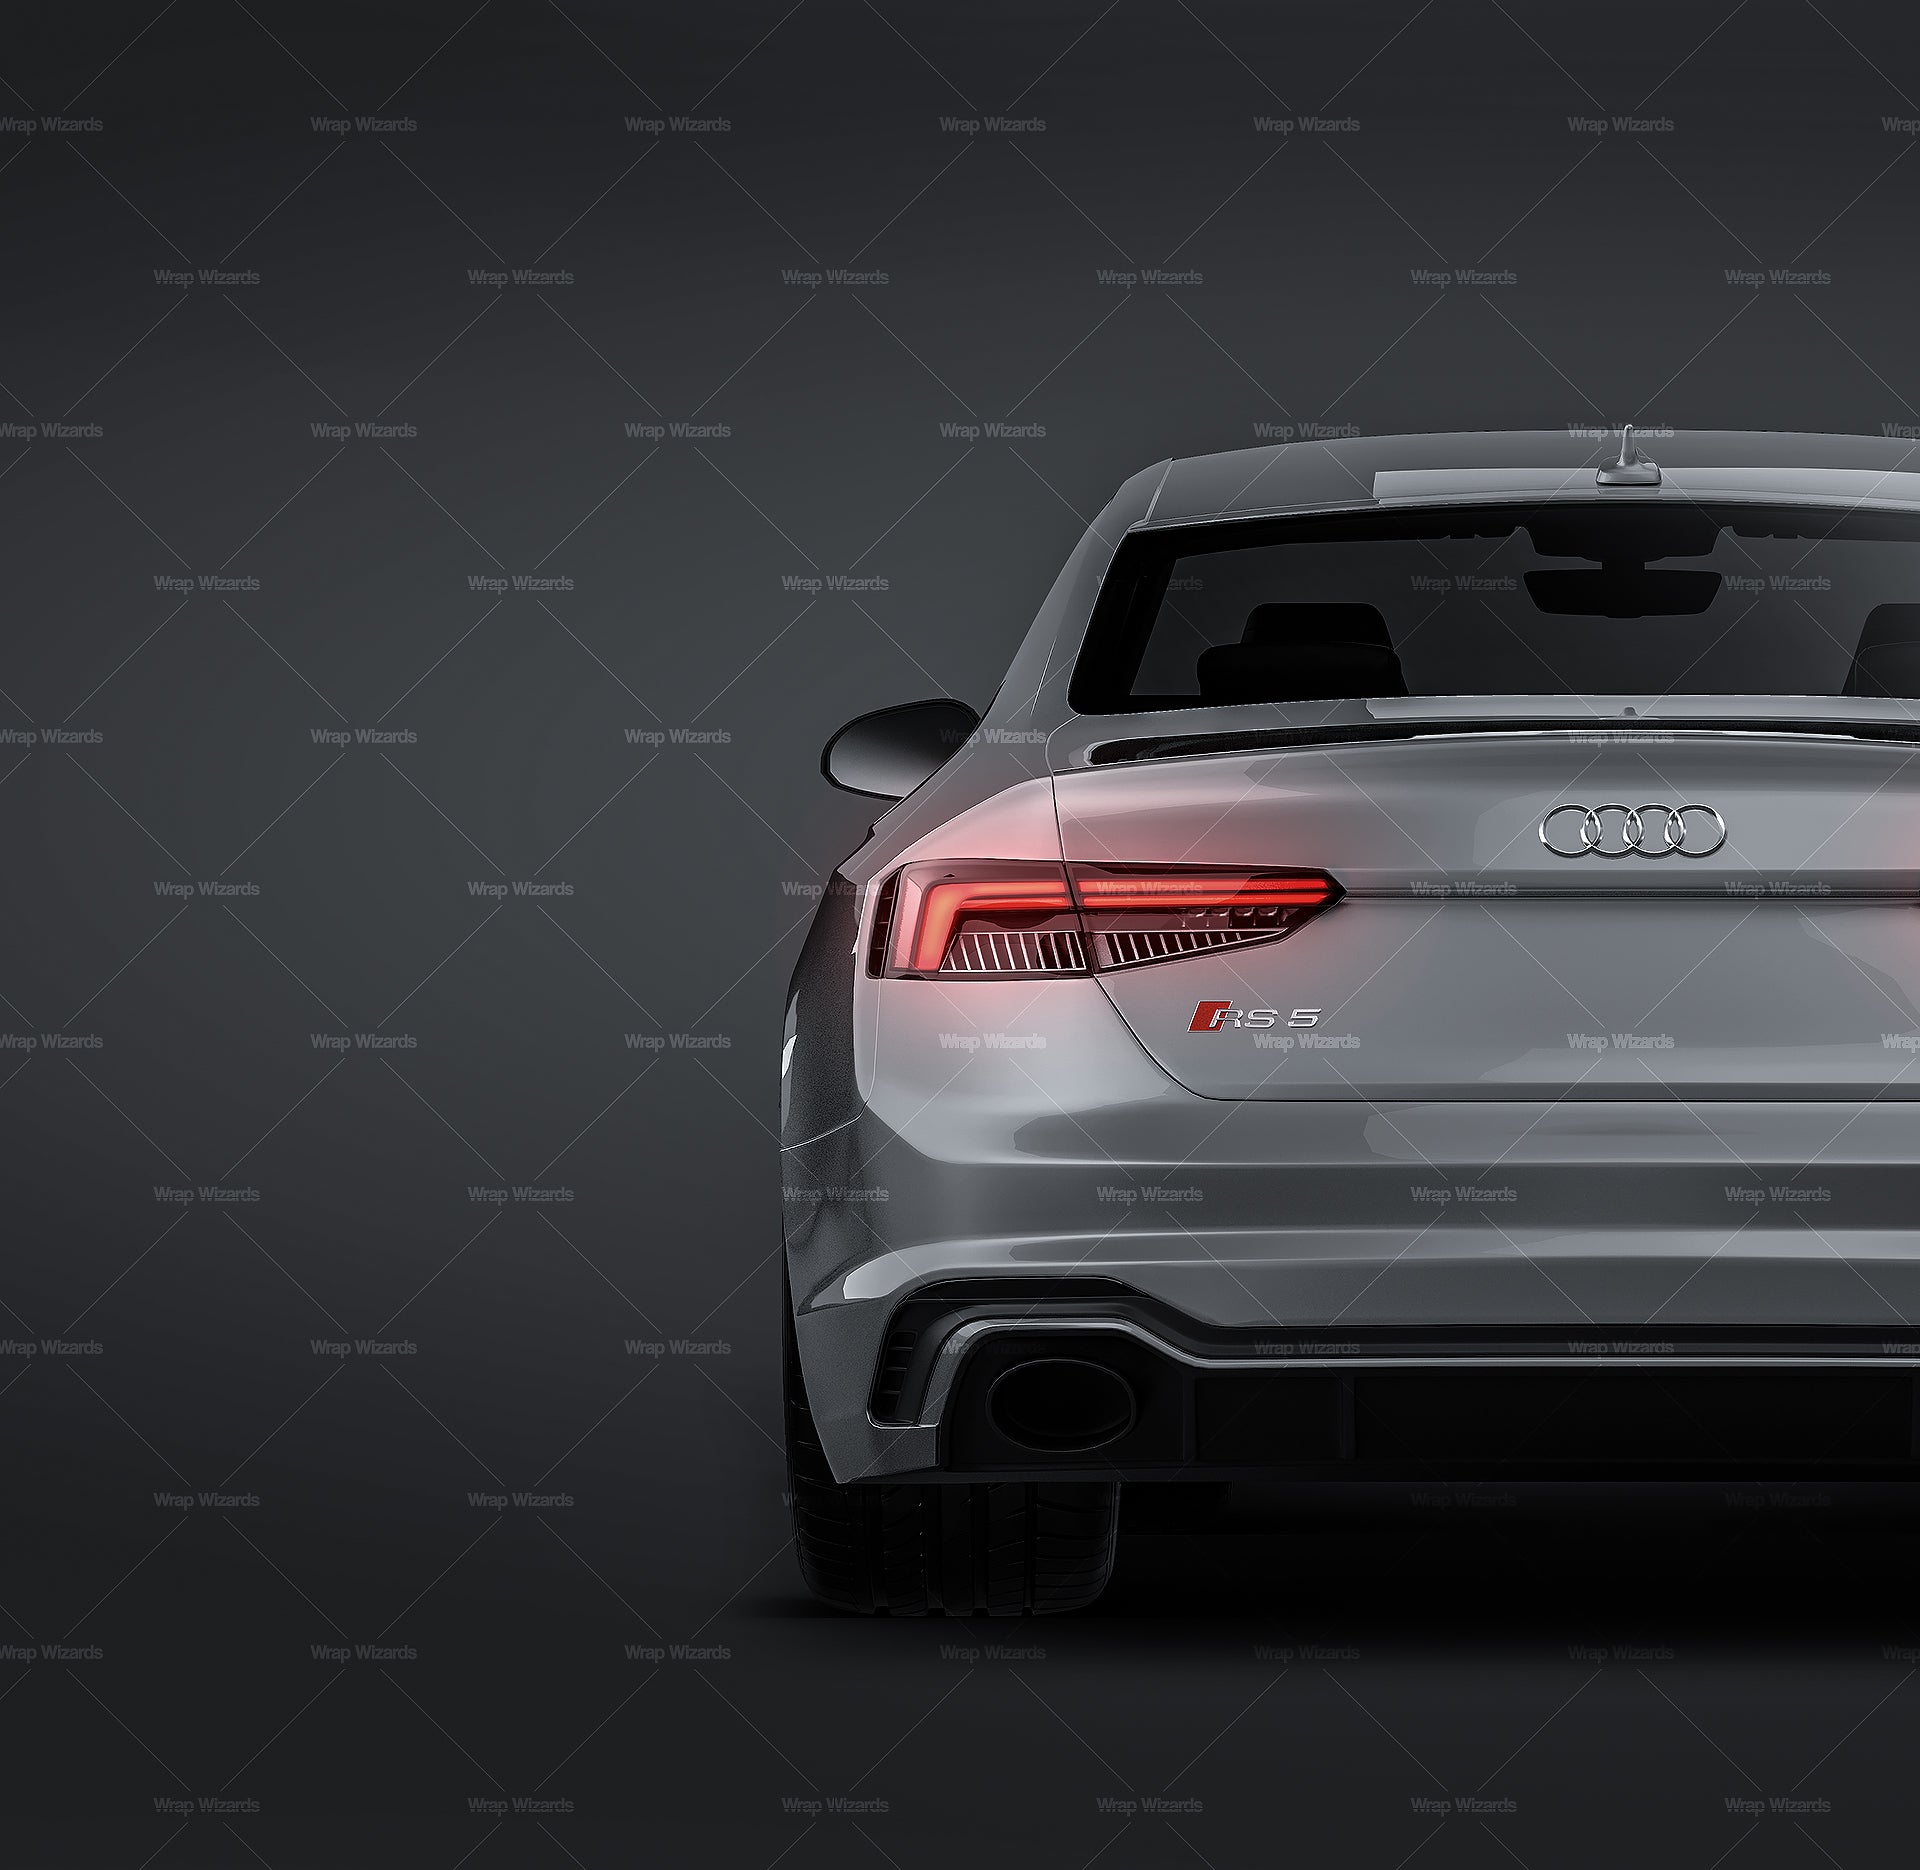 Audi RS5 2018 glossy finish - all sides Car Mockup Template.psd